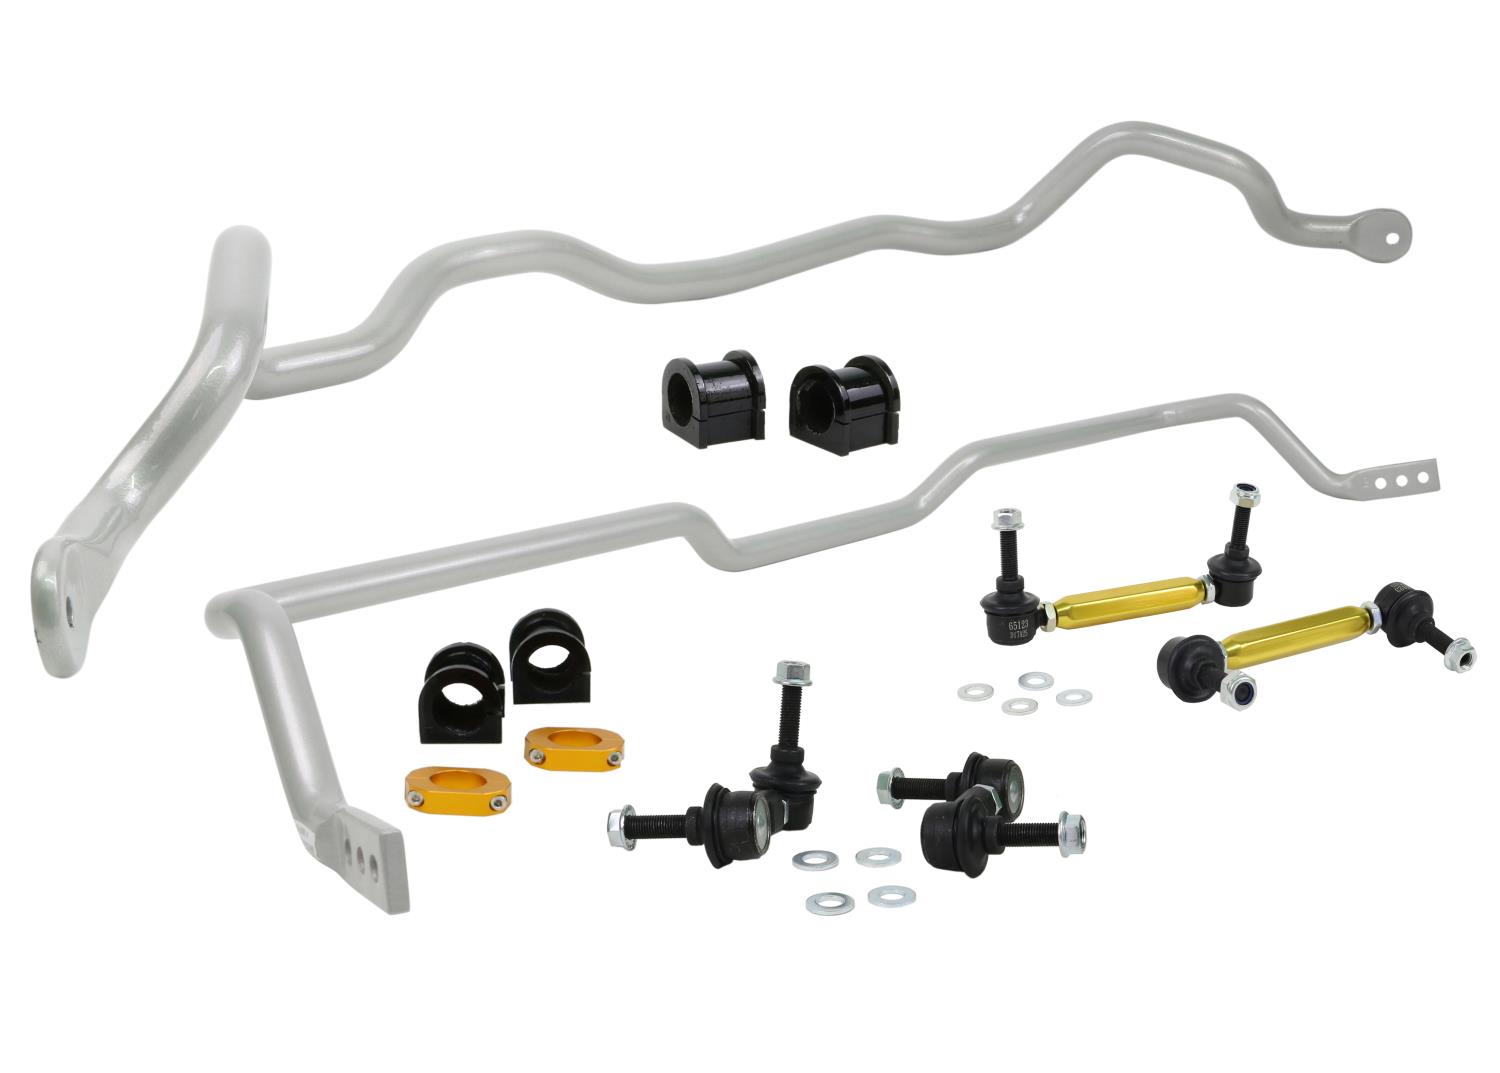 BMK009 Front and Rear Sway Bar Kit w/24 mm Rear for 2003-2006 Mitsubishi Lancer Evo, 2005-2006 Evo MR, RS